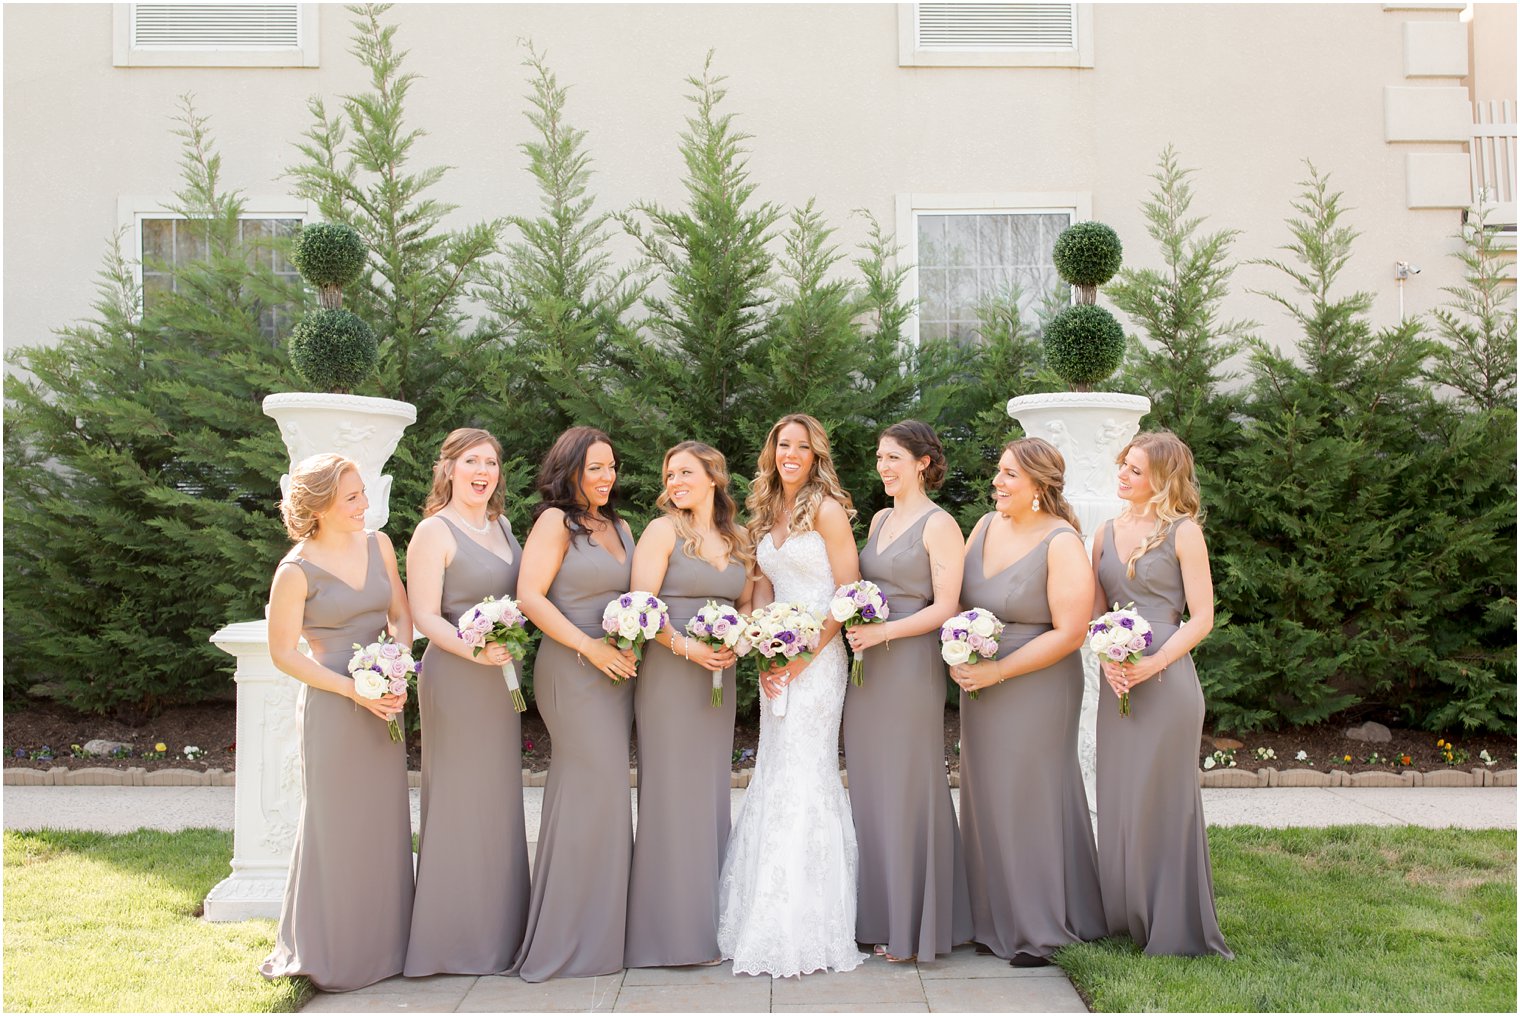 Bride and bridesmaids in gray dresses | Photos by Idalia Photography